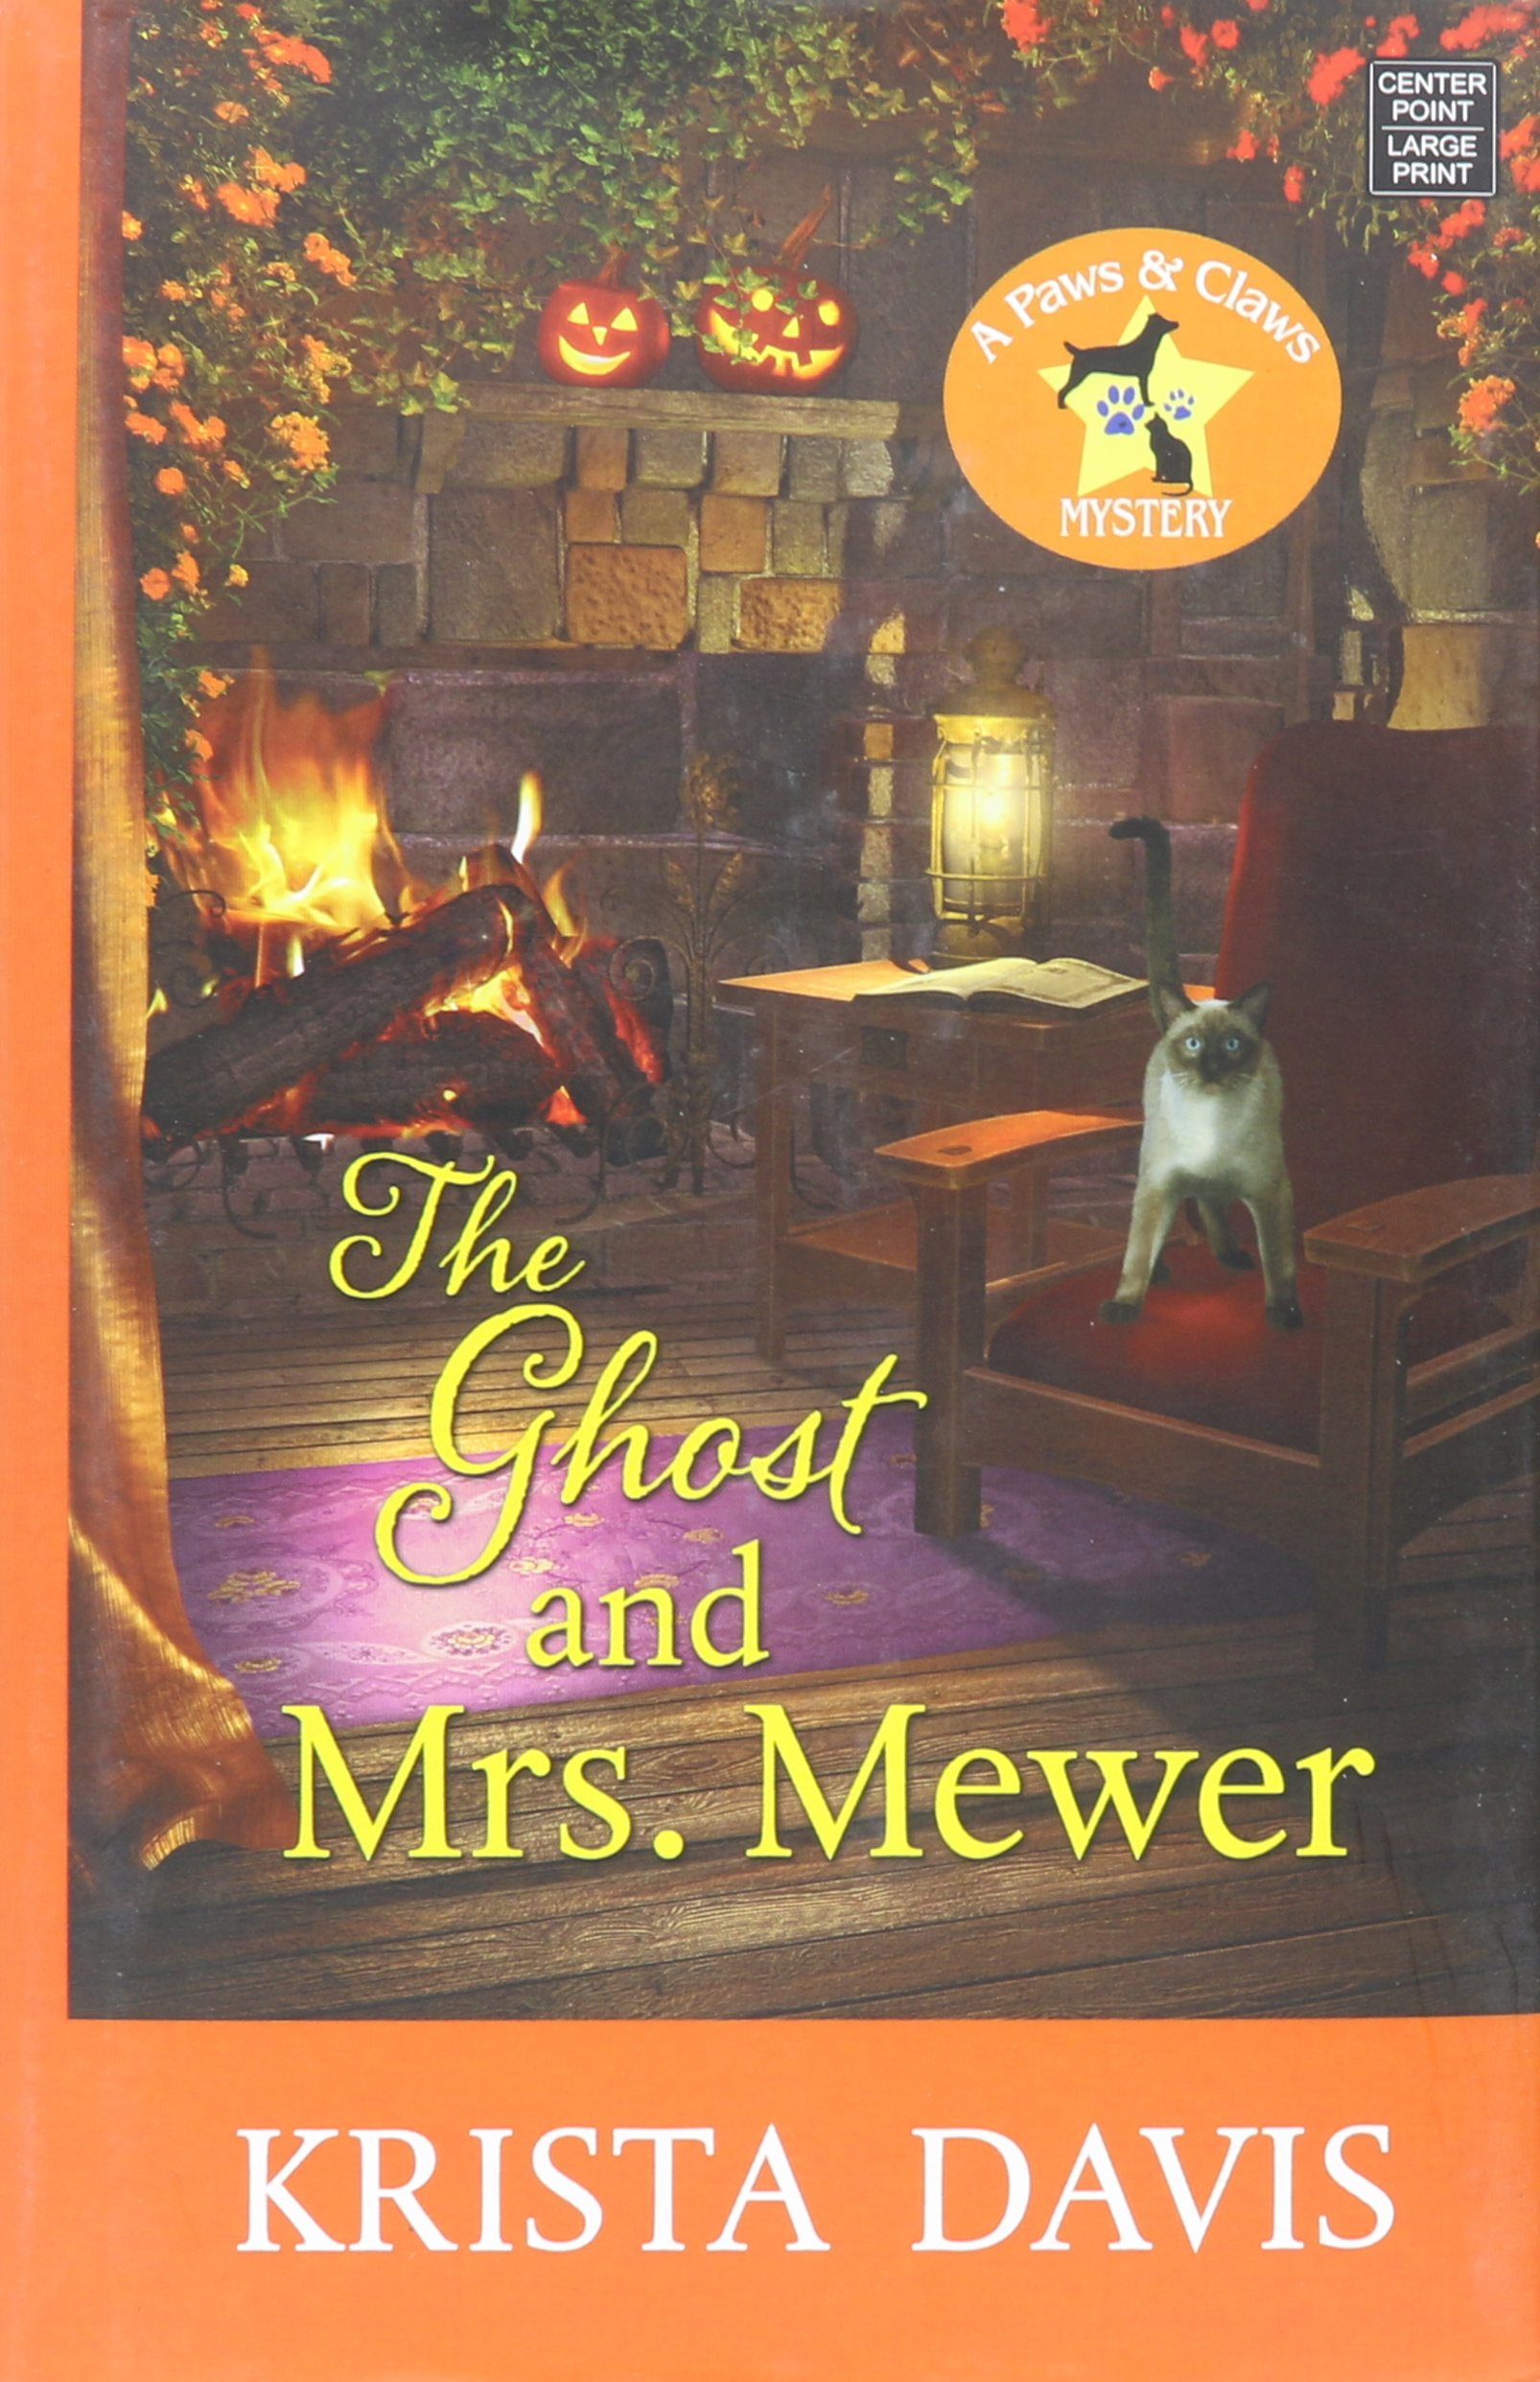 large print cover of The Ghost and Mrs. Mewer